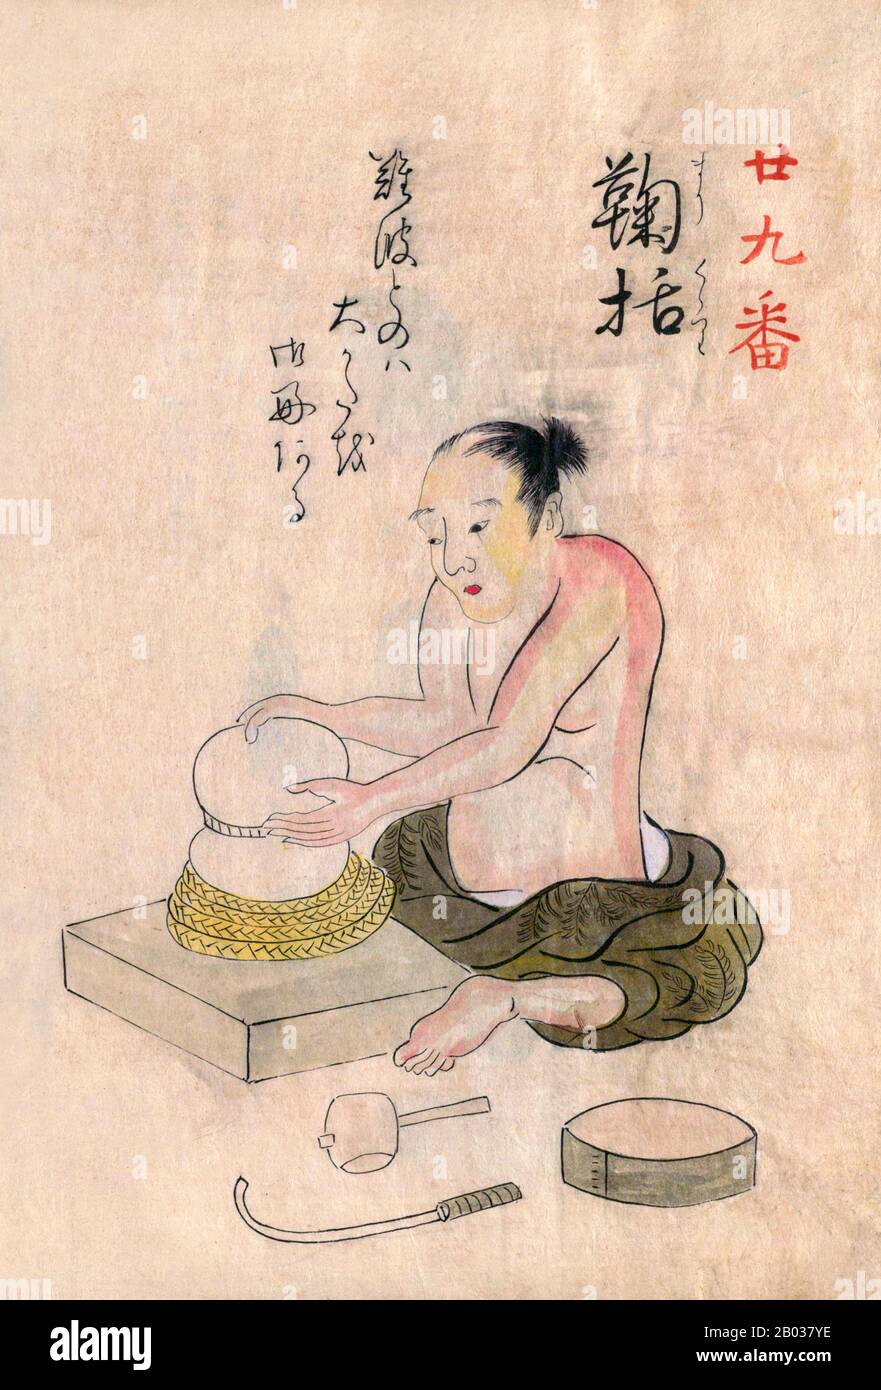 Hand-coloured illustration from a Japanese miscellany on traditional trades, crafts and customs in mid-18th century Japan, dated Meiwa Era (1764-1772) Year 6 (c. 1770 CE). Stock Photo